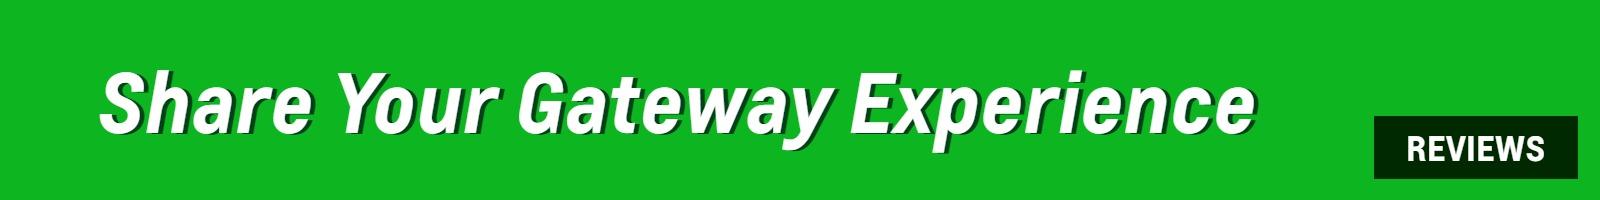 Share Your Gateway Experience